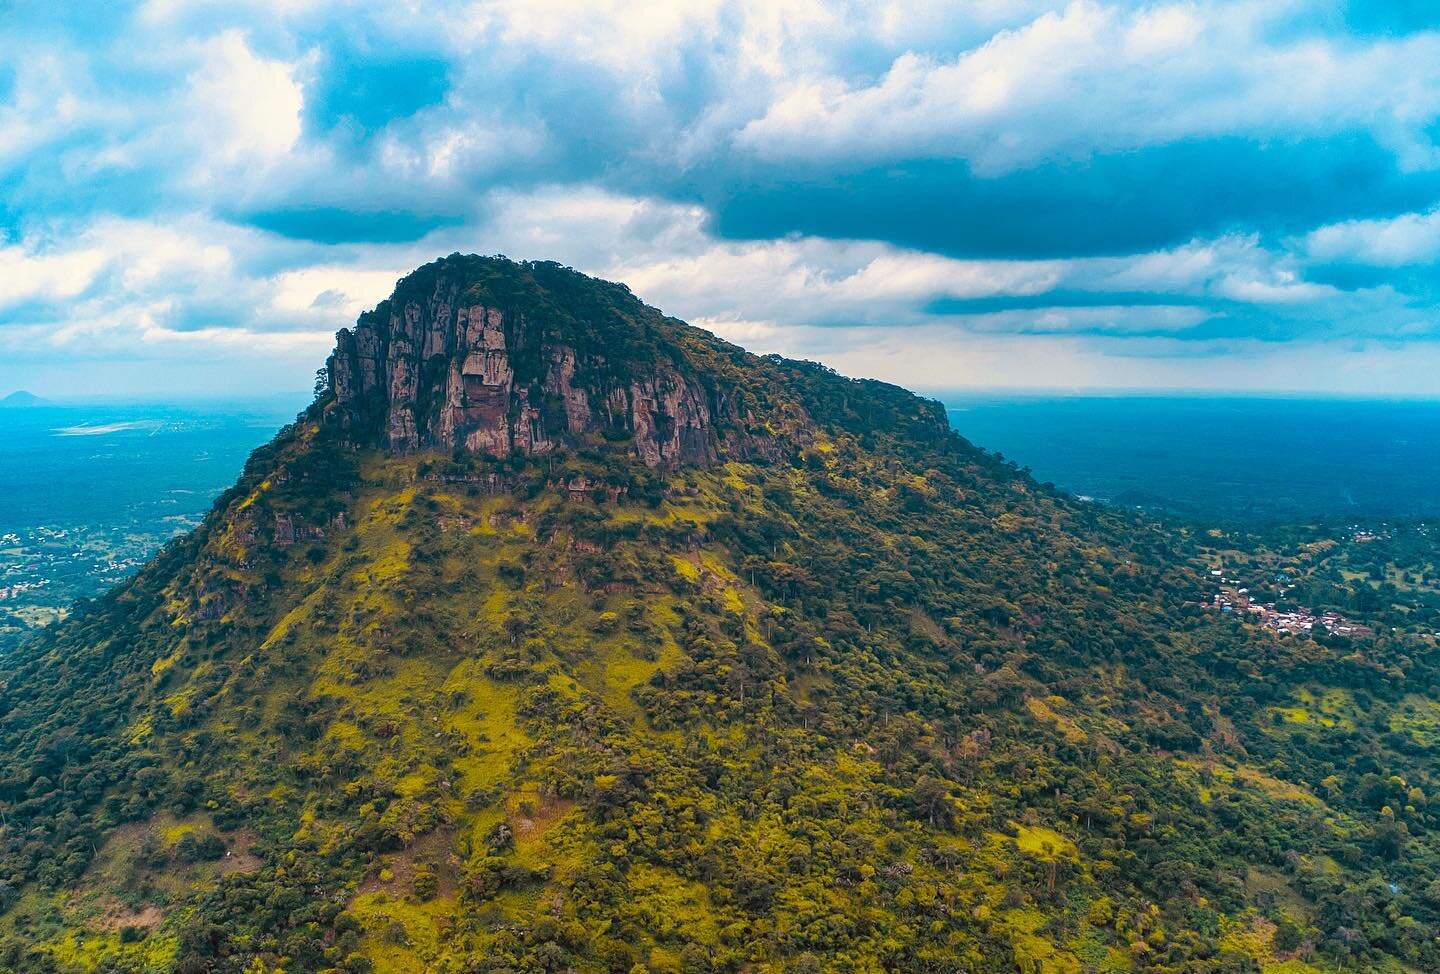 Mount Adaklu sitting pretty as the clouds set. Enjoyed this short work trip to the Volta region. Looking forward to an extension proper trip of the region. Who&rsquo;s down ?